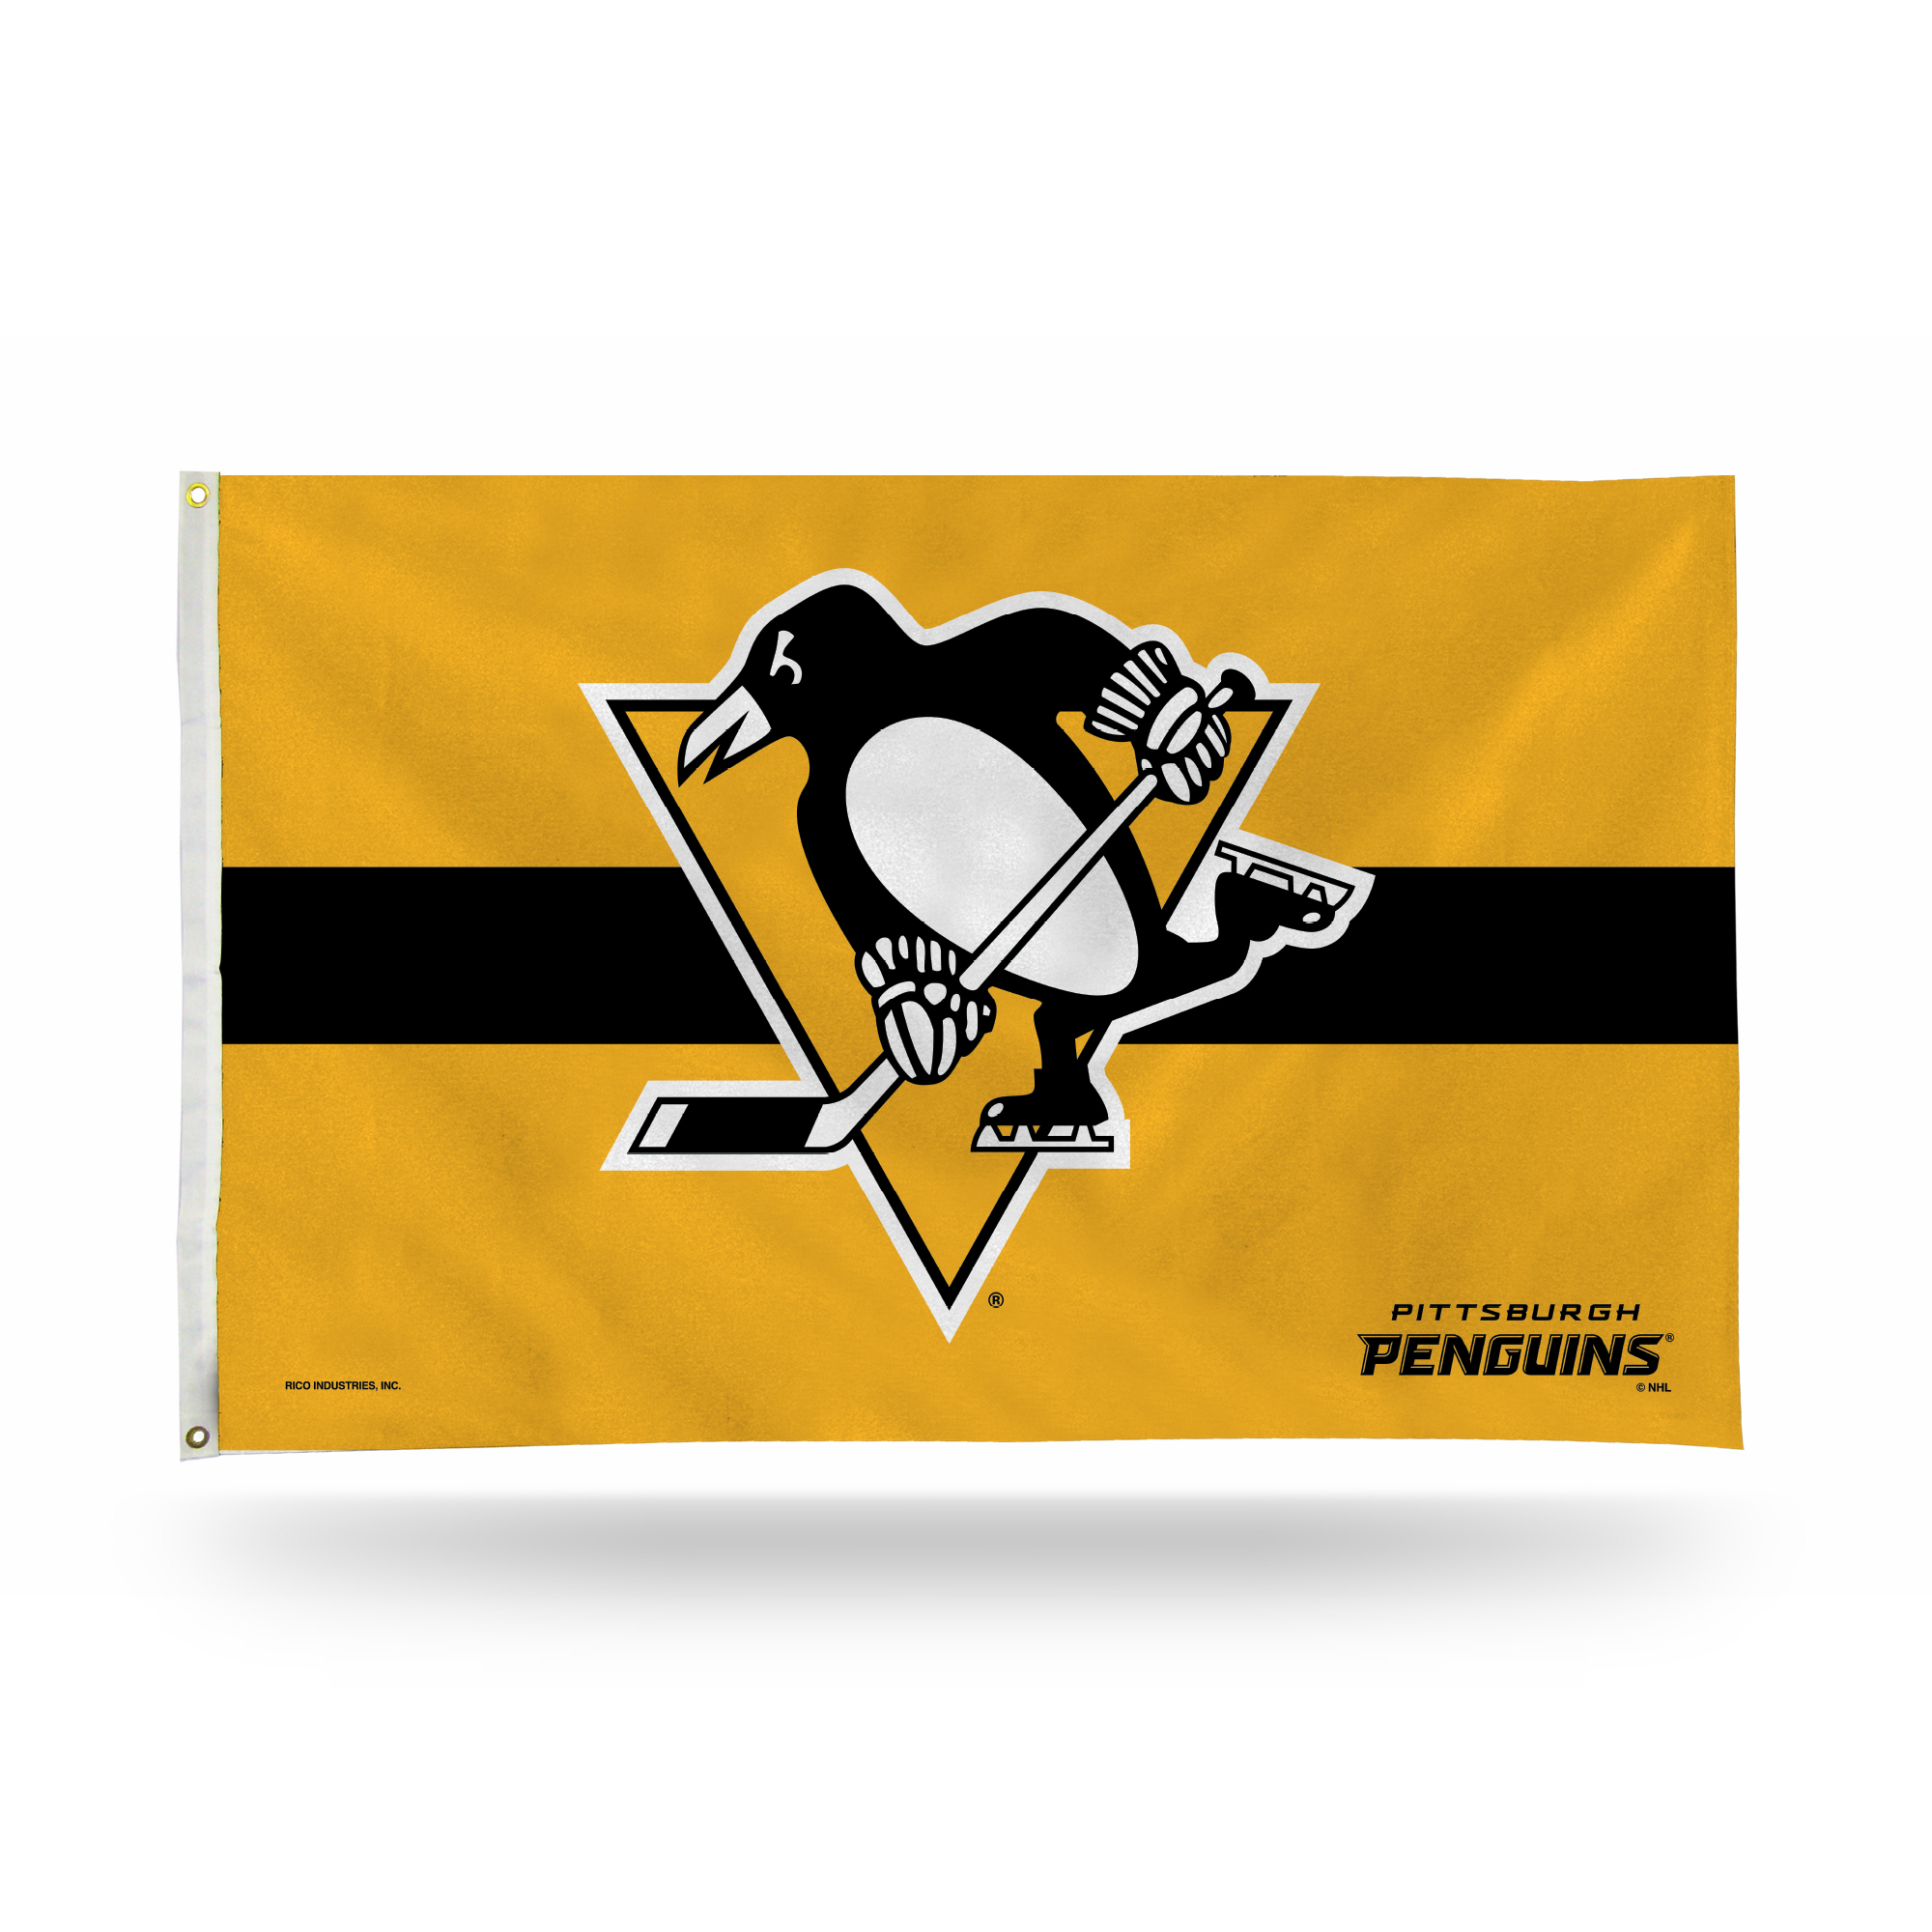 Rico Industries NHL Hockey Pittsburgh Penguins Gold with Black Stripe 3' x 5' Banner Flag